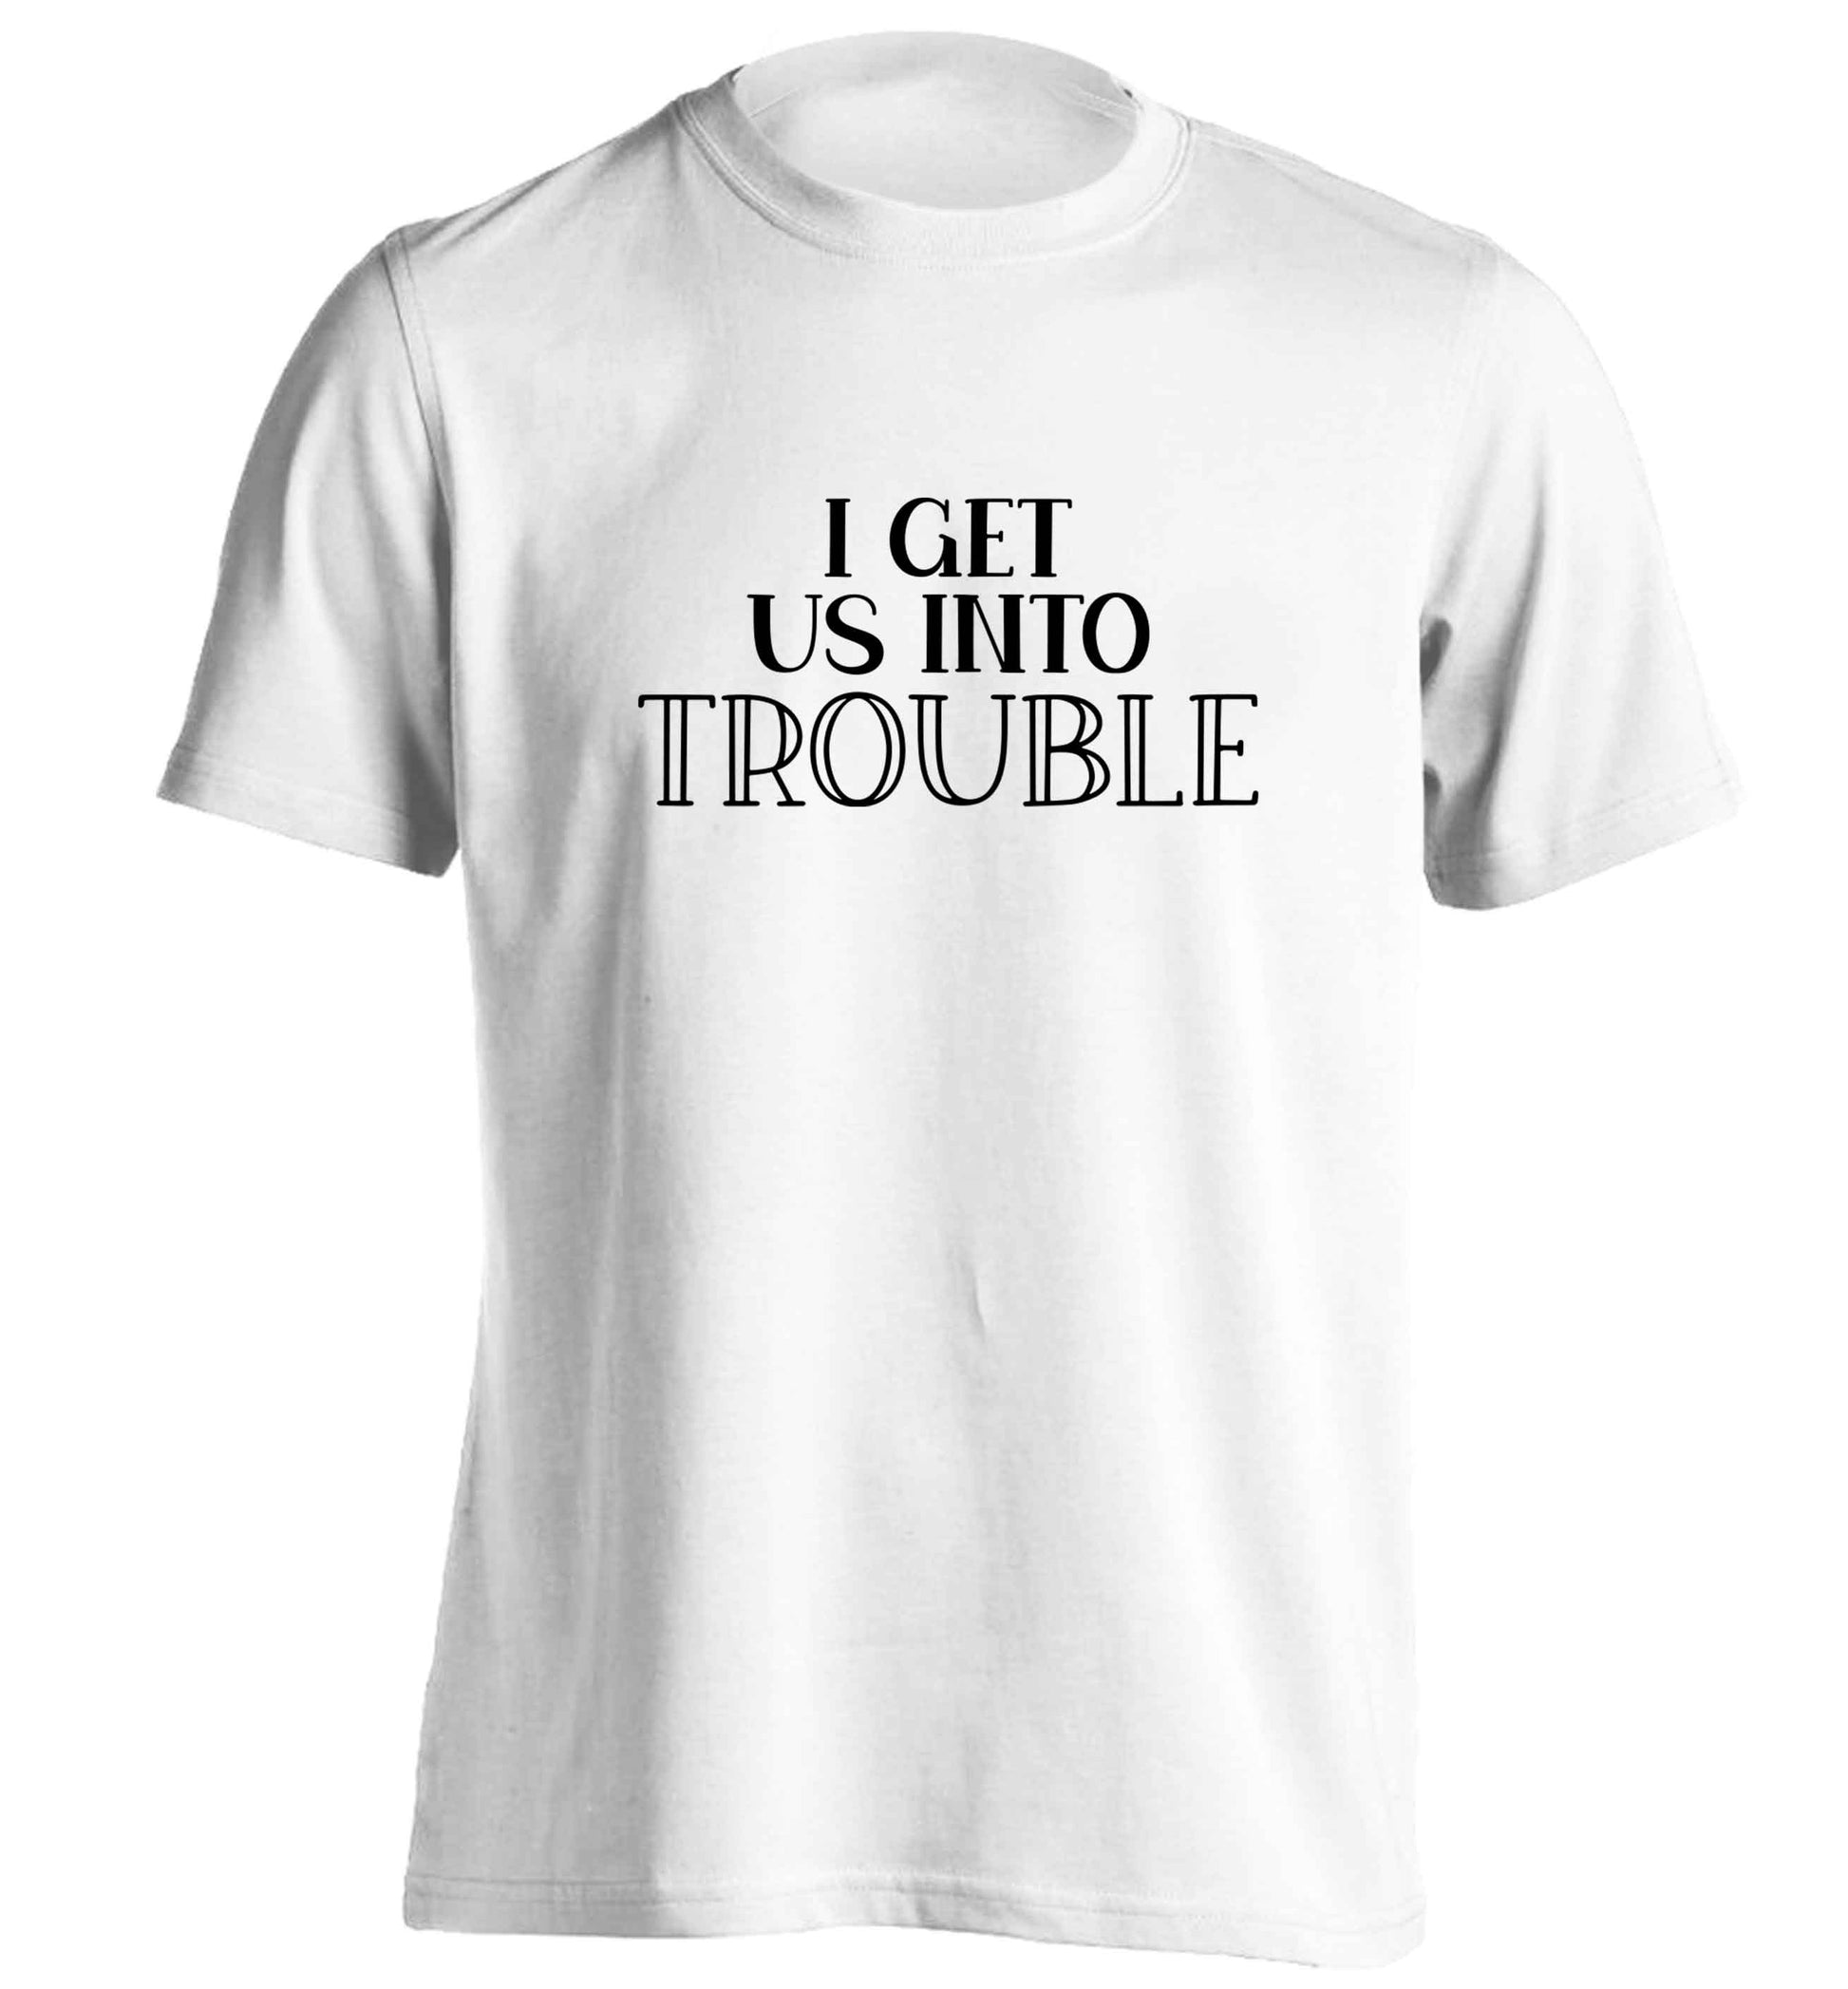 I get us into trouble adults unisex white Tshirt 2XL